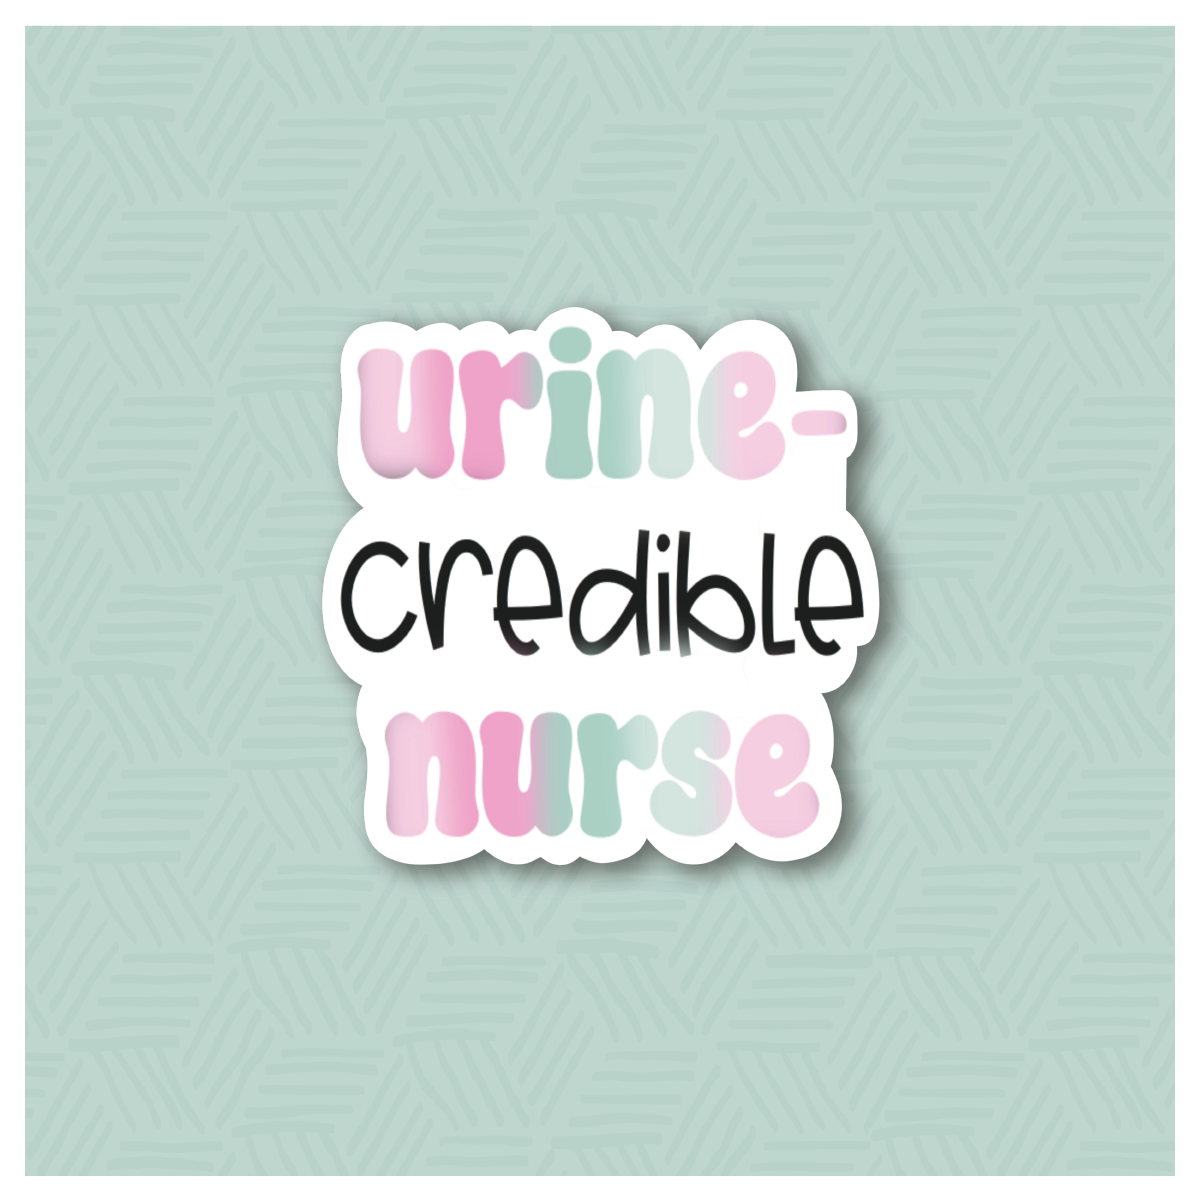 Urine-credible Nurse Hand Lettered Cookie Cutter